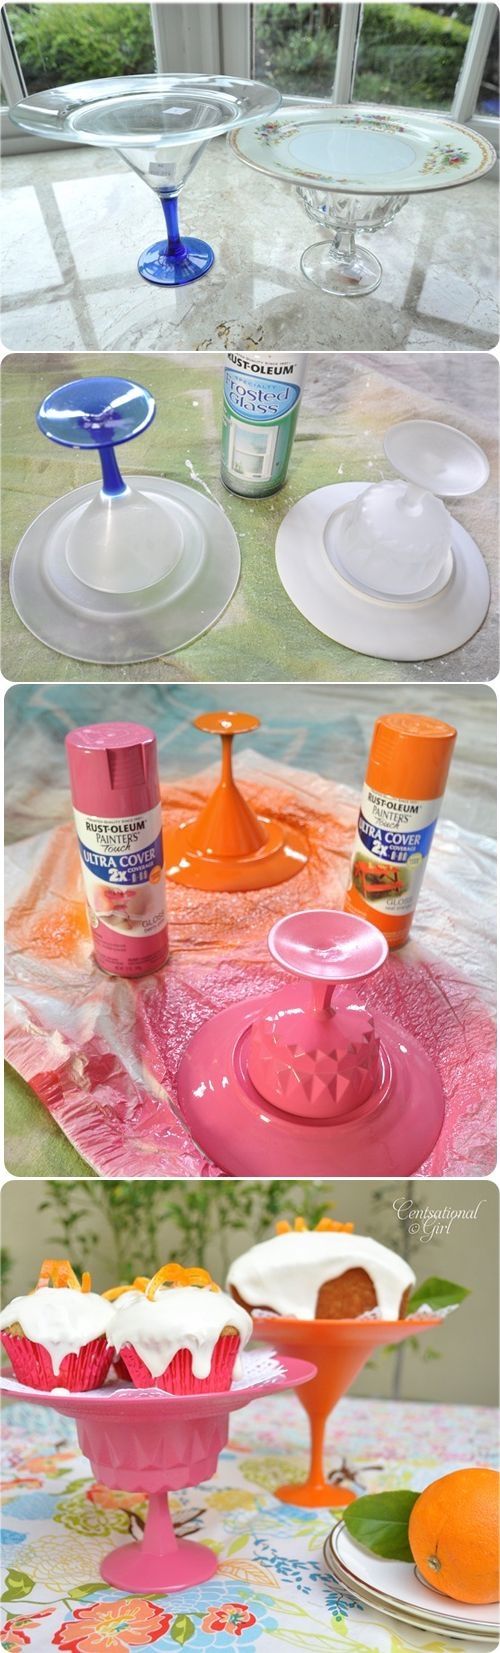 21 Great DIY Tutorials for Home Decoration  (5)